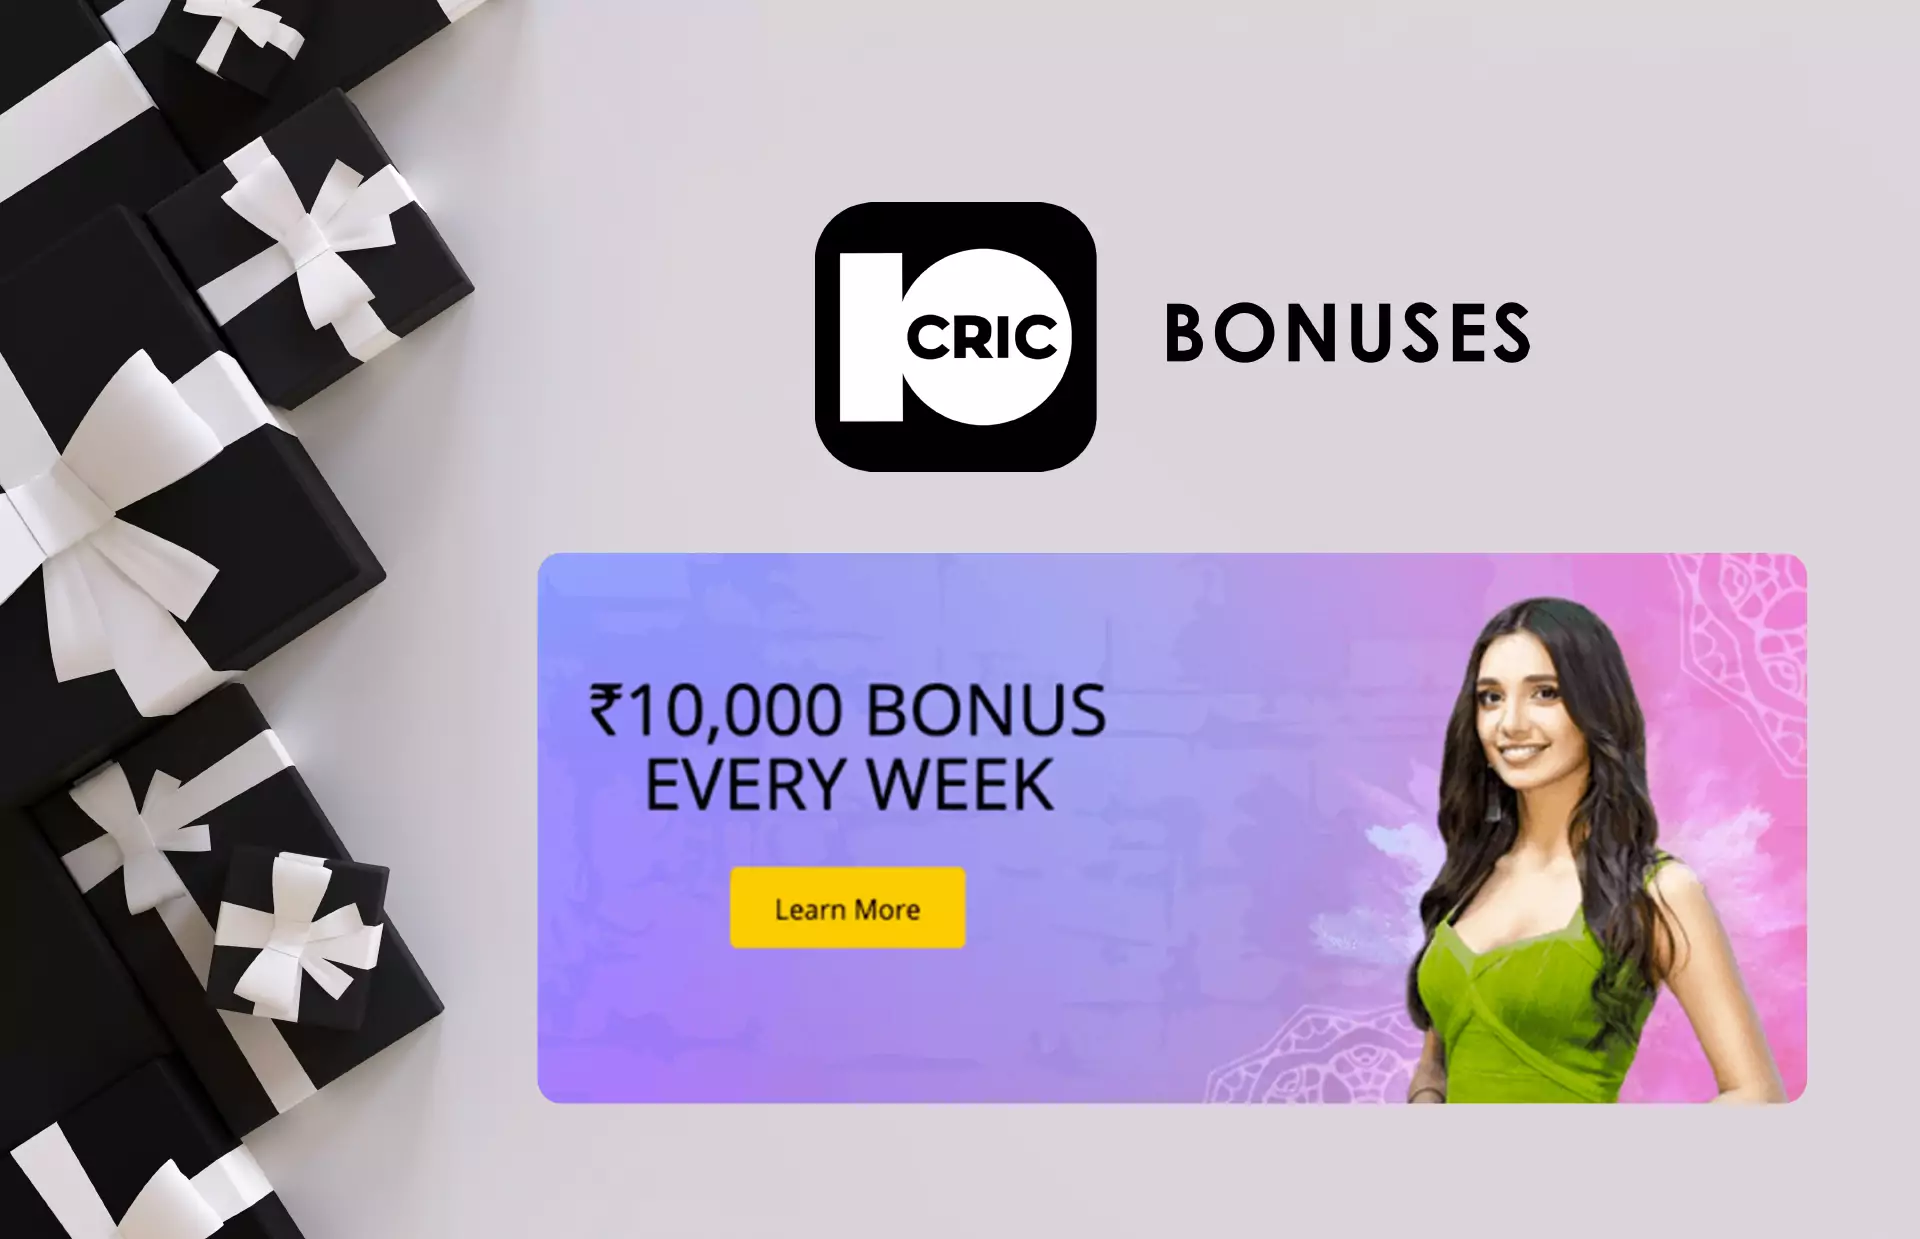 Don't forget to claim a welcome bonus of 10Cric after completing the registration.